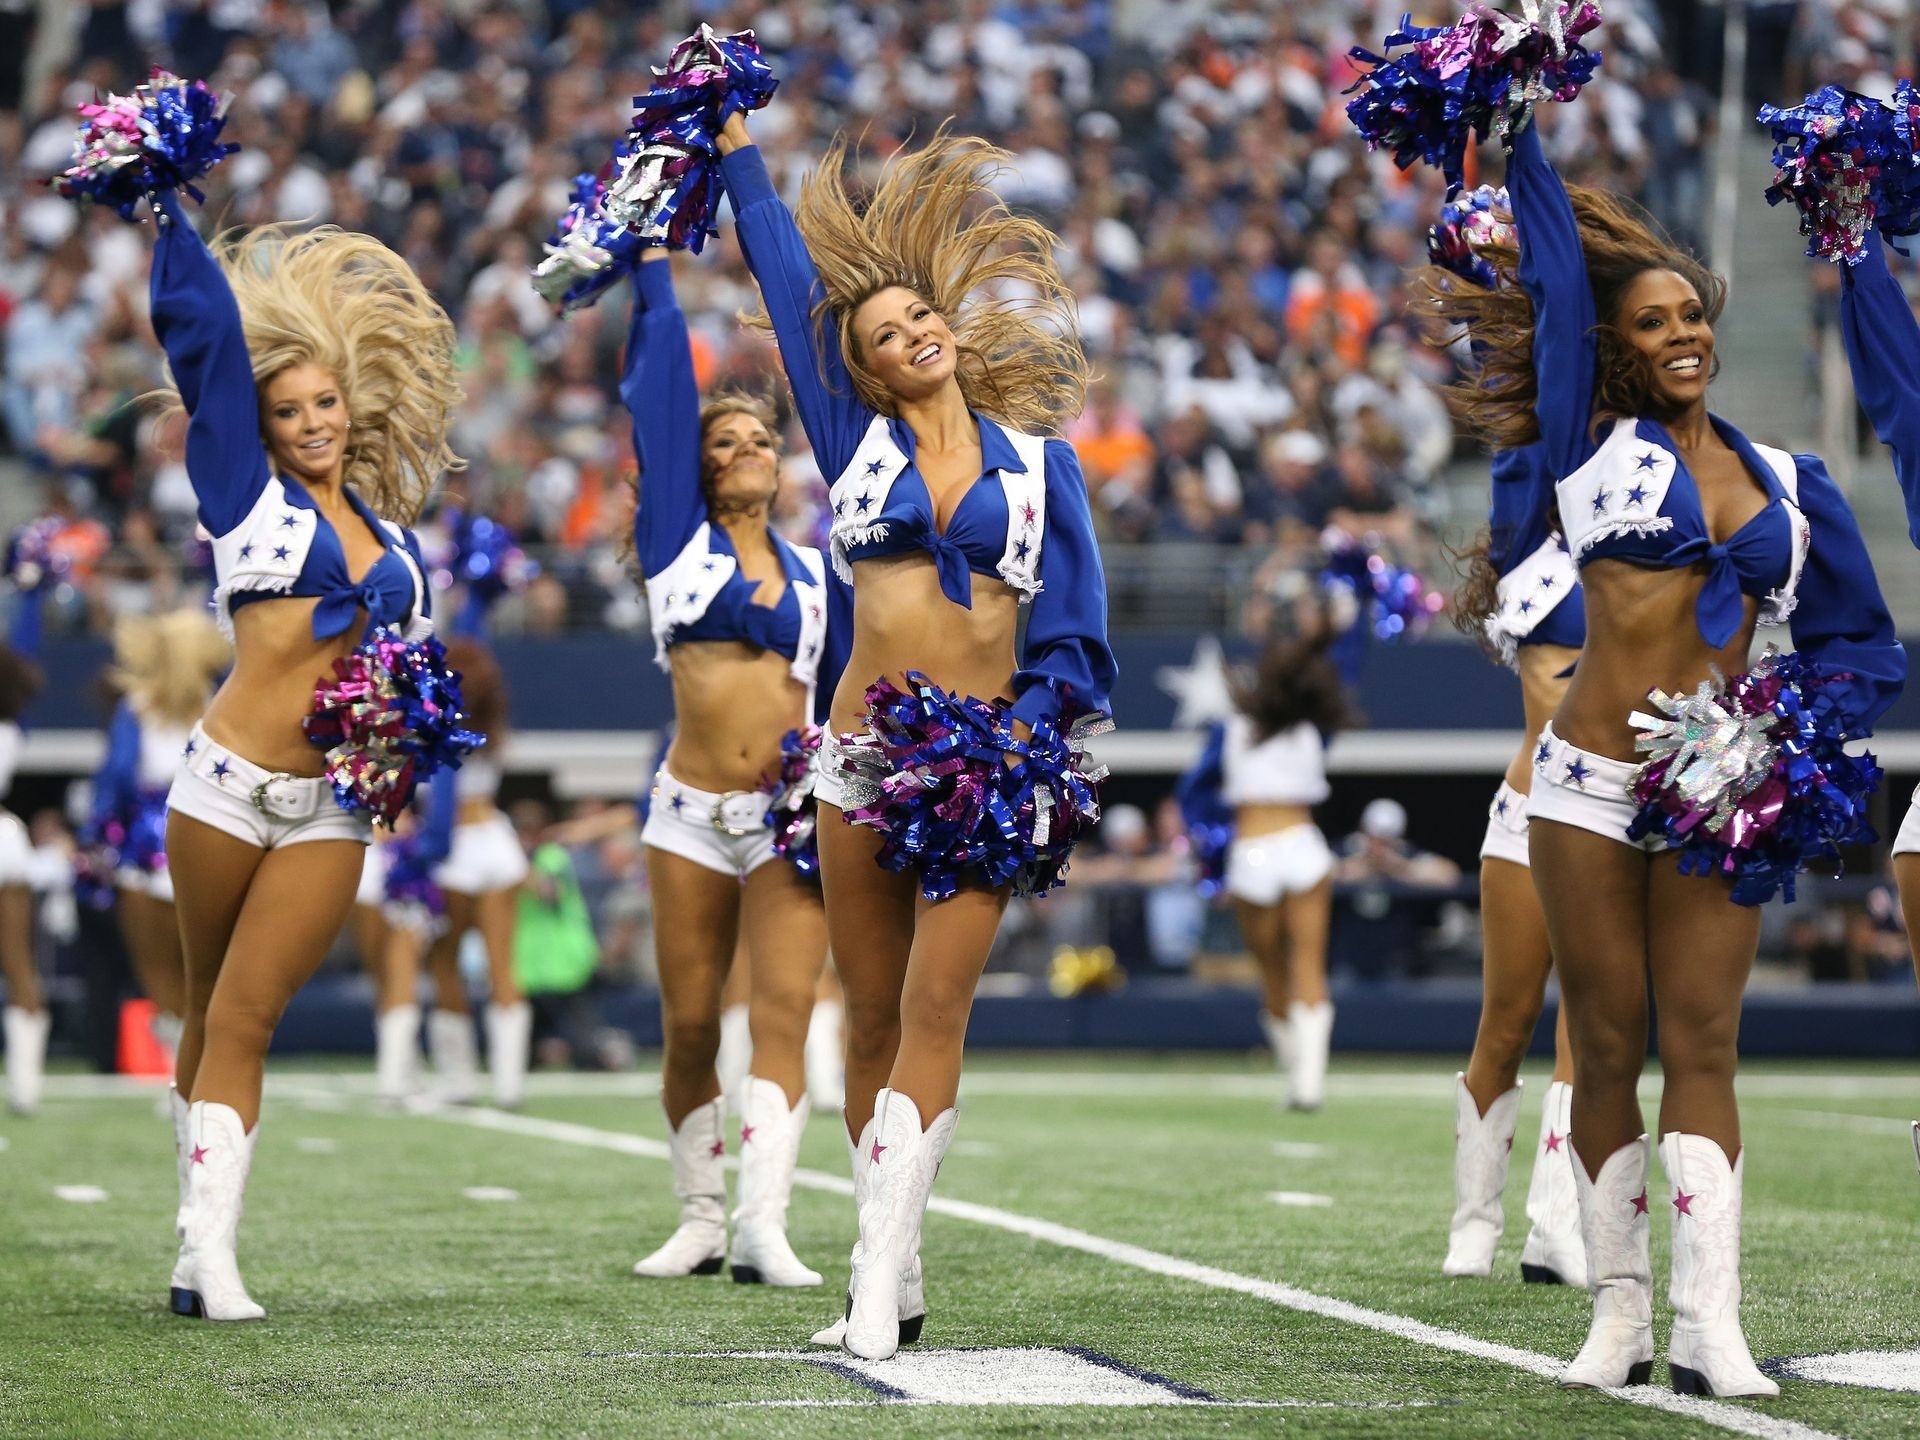 1920x1440 A reporter recently asked the Dallas Cowboys cheerleaders and team members  where they like to hang